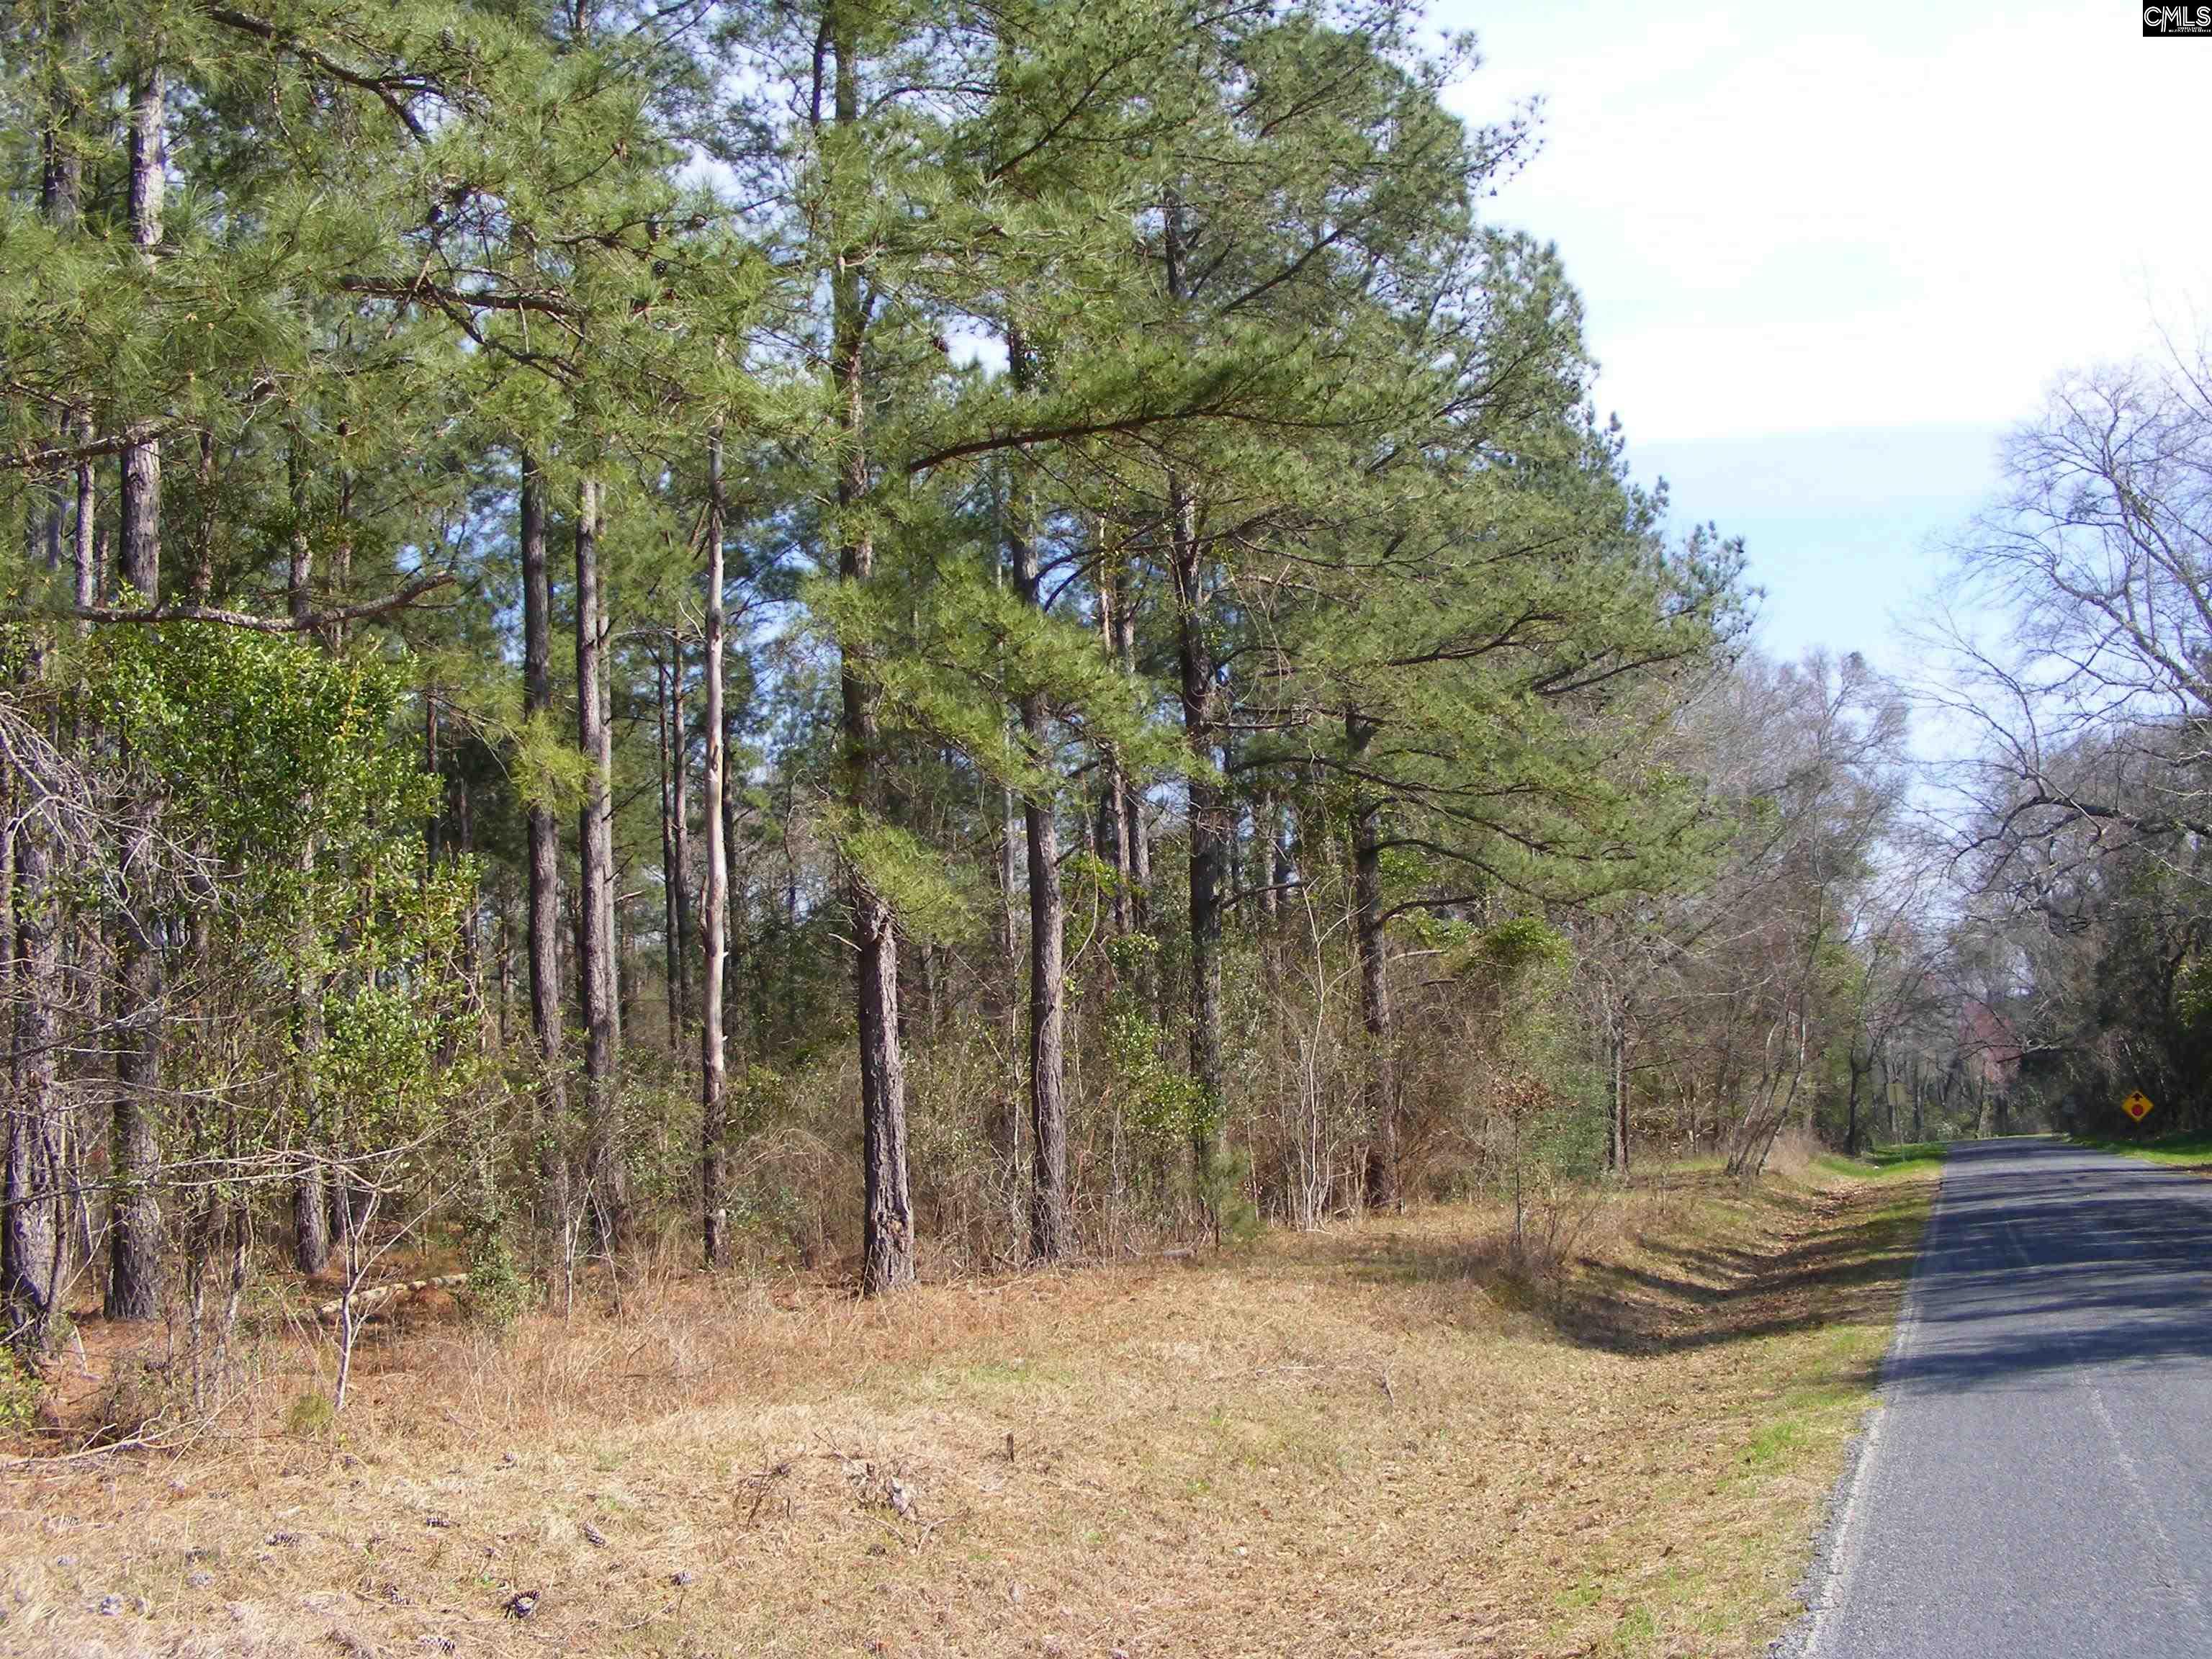  Lots For Sale - 000 Salley Road, Salley, SC - 15 